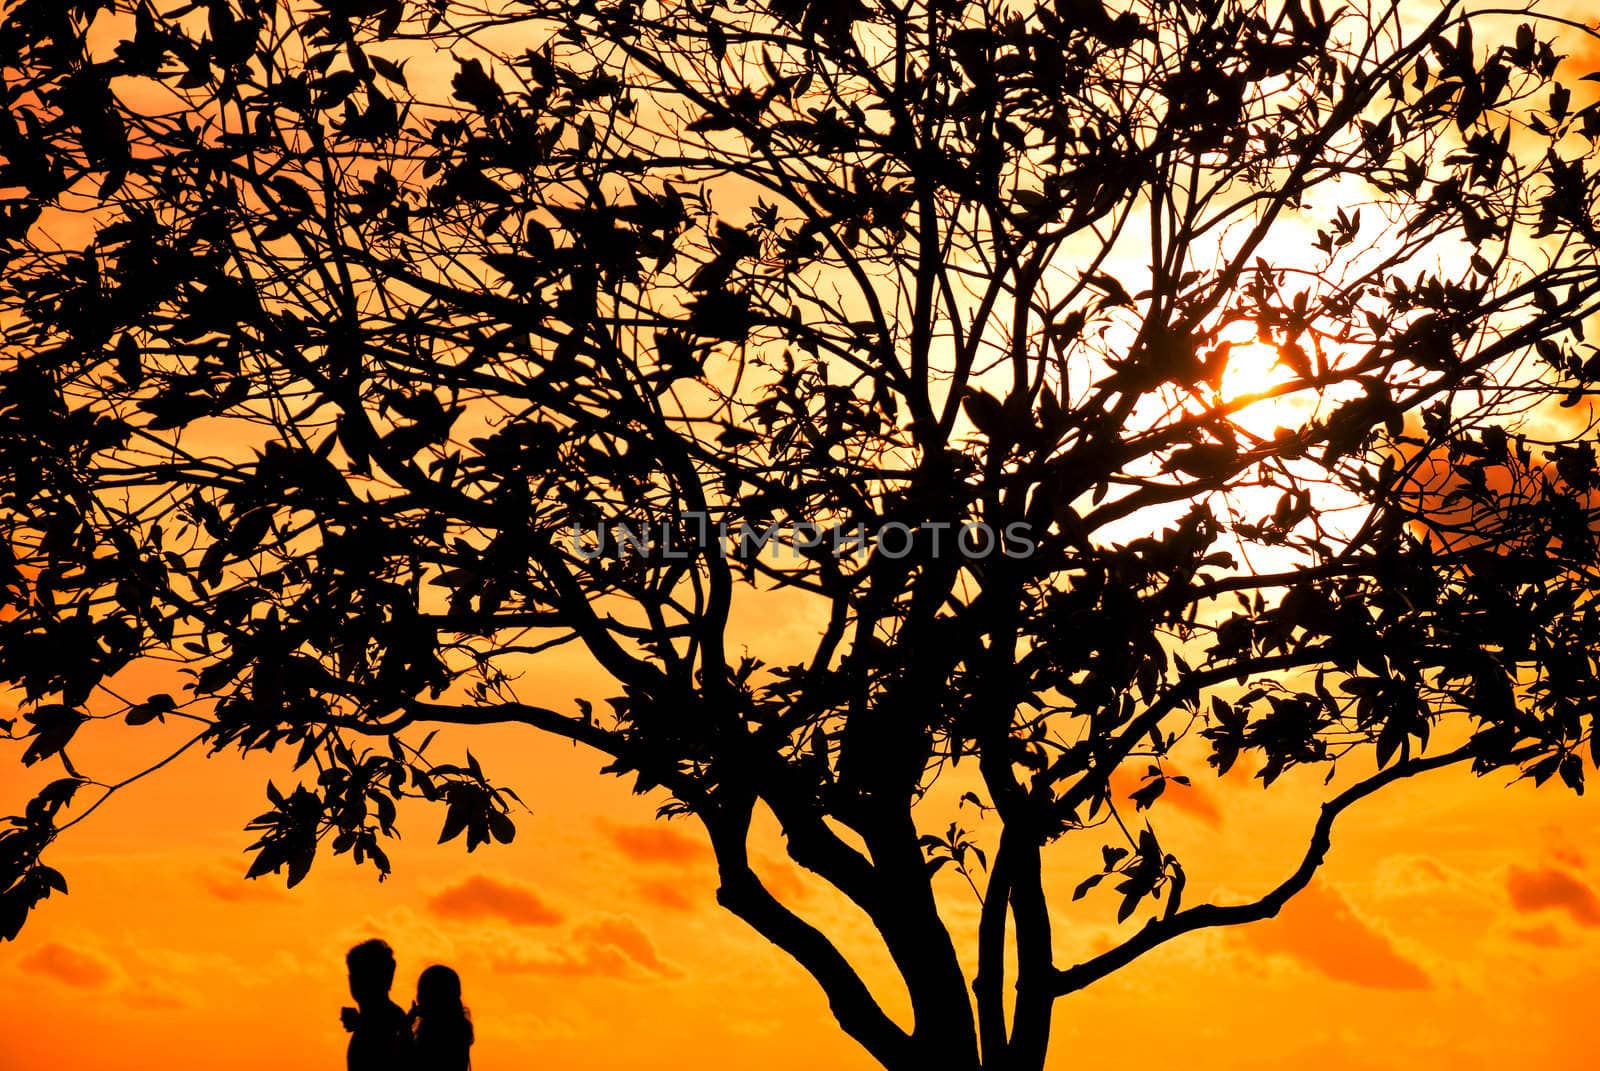 Silhouettes of two lovers under a tree at a fiery red sunset evening